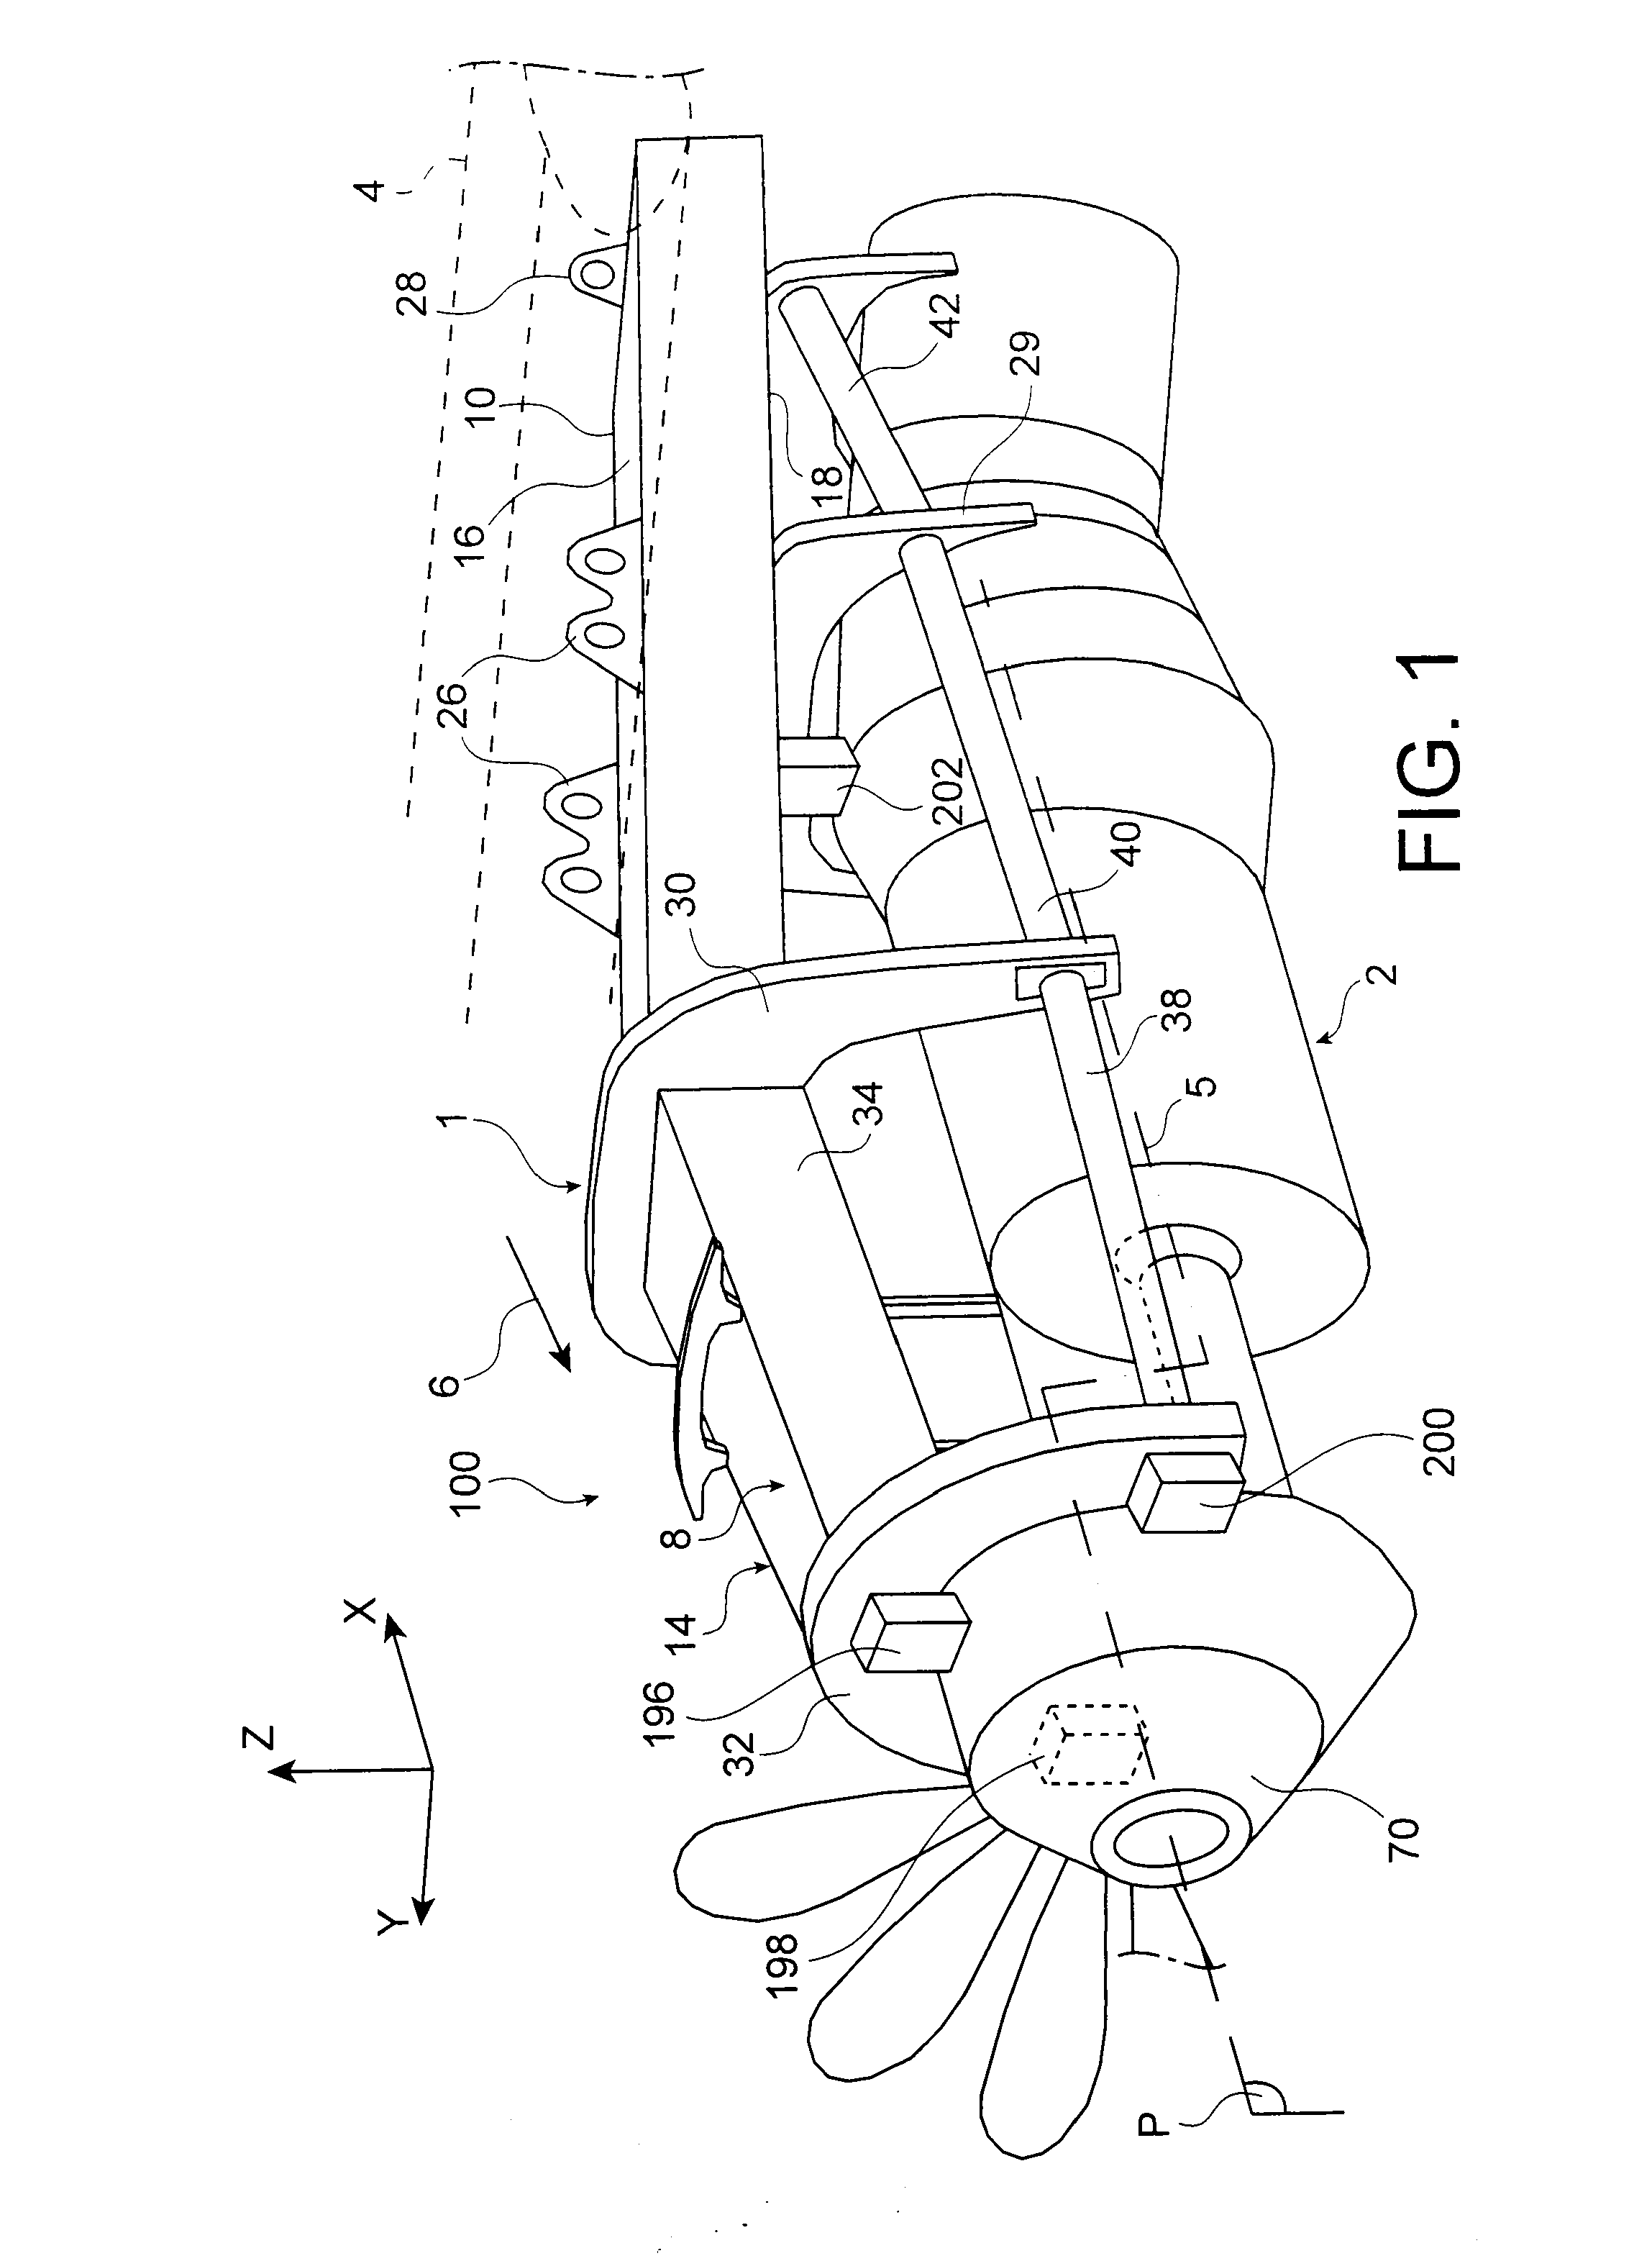 Device for mounting an aircraft turboprop engine comprising hydraulic attachments